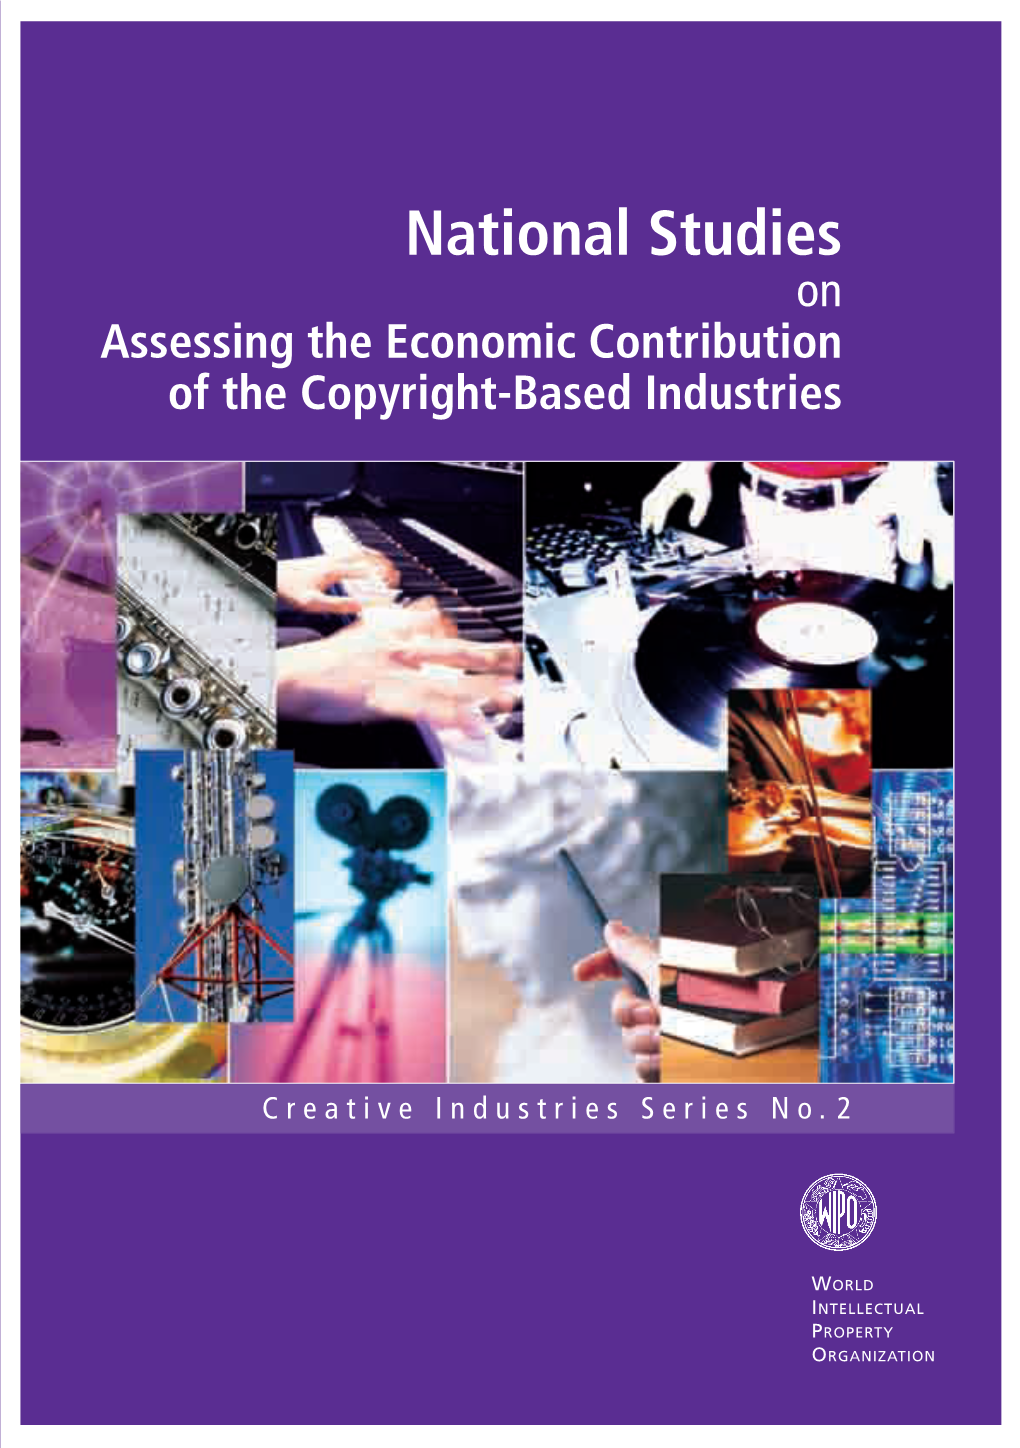 National Studies on Assessing the Economic Contribution of the Copyright-Based Industries